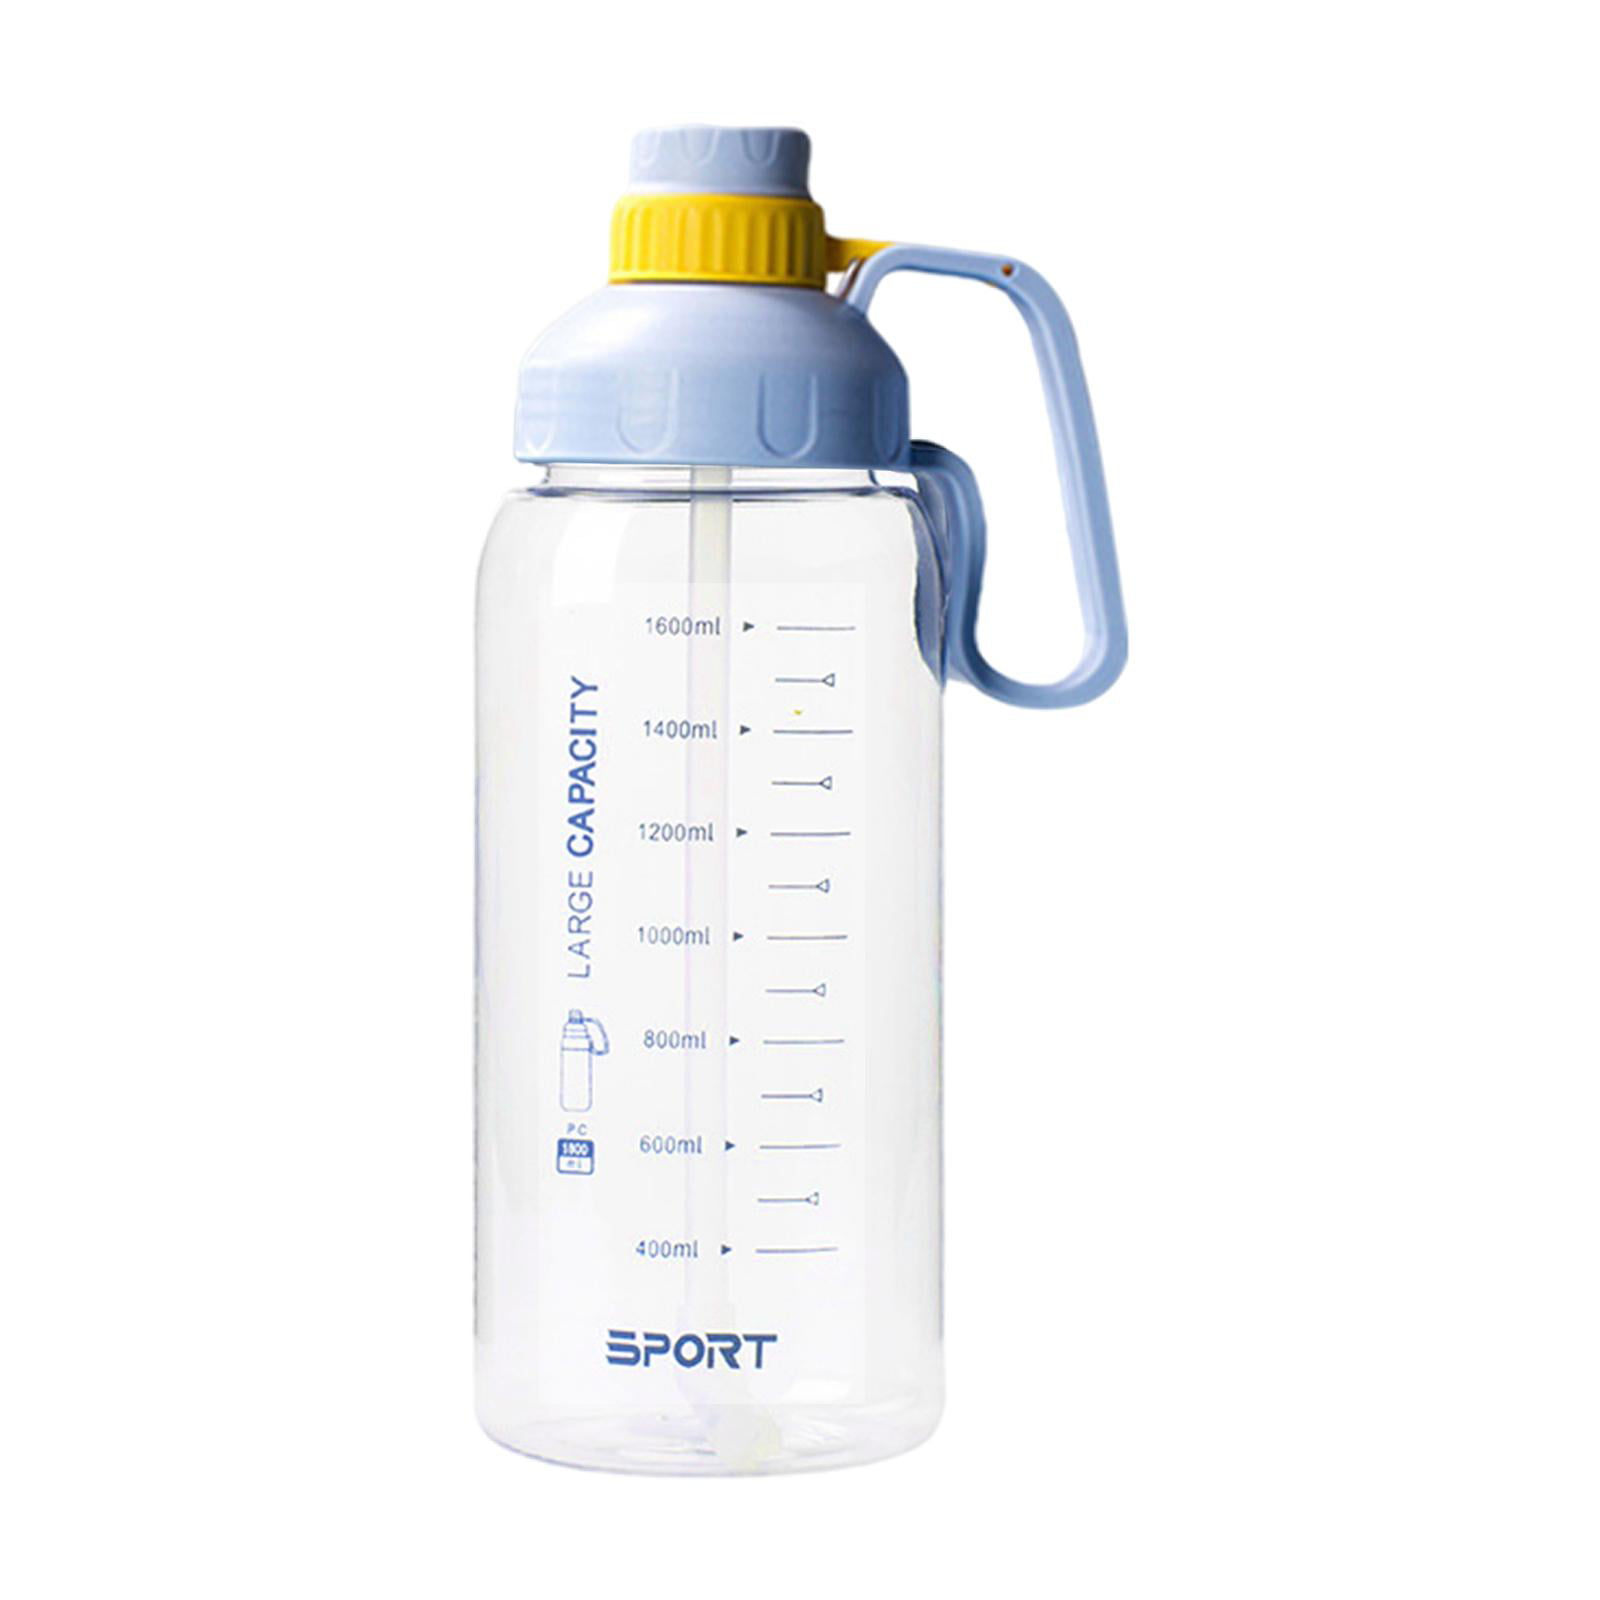 SUPERMALL 1.8L Motivational Water Bottle, Gym Bottle with Straw